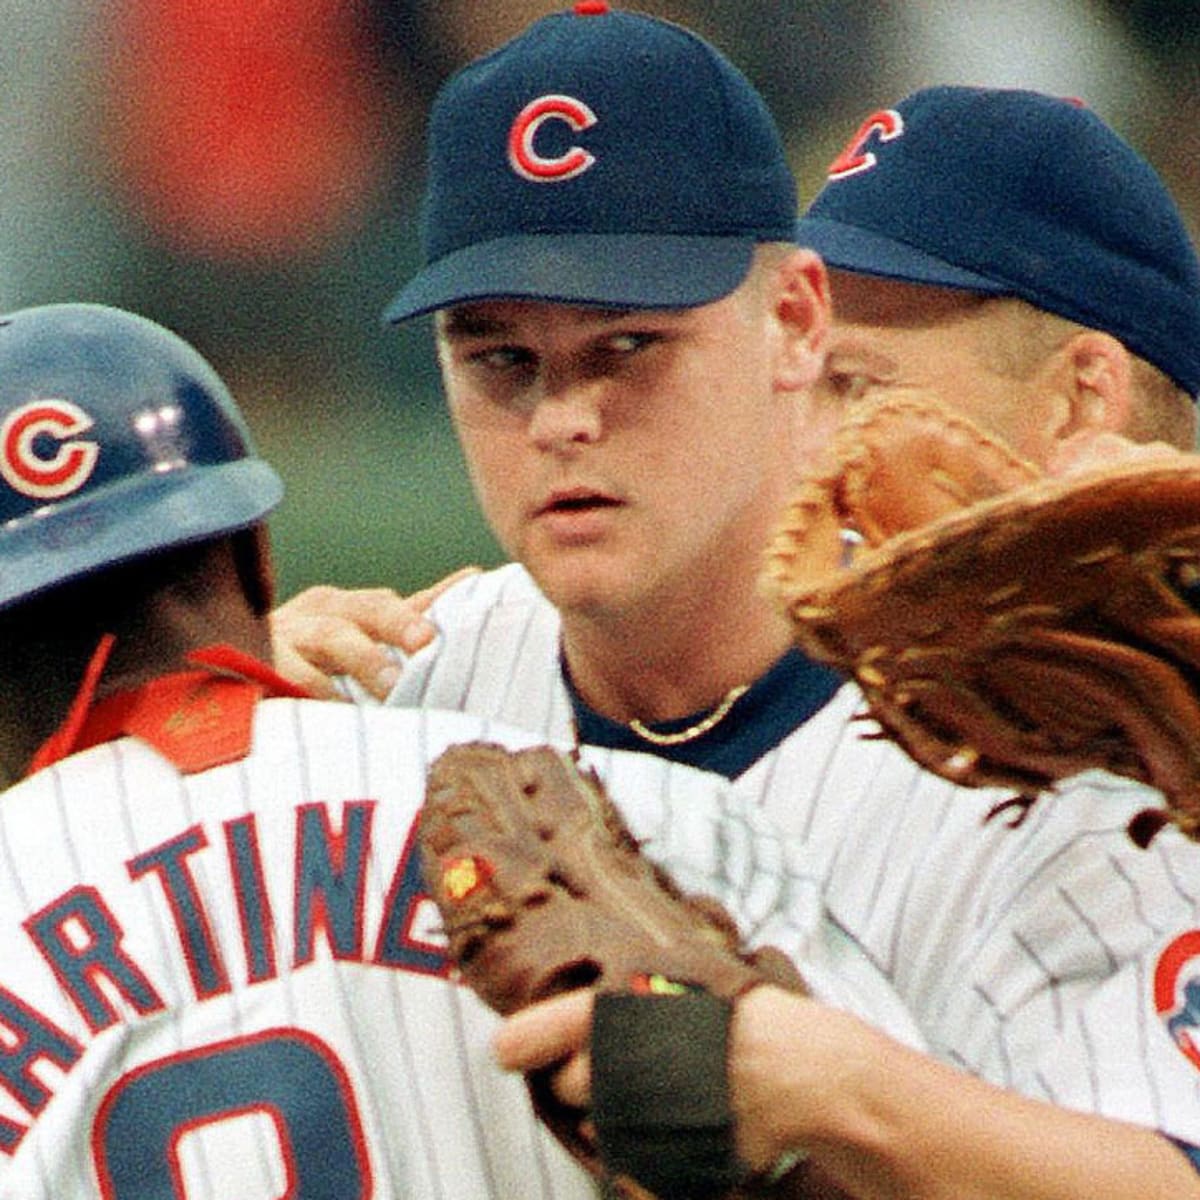 Kerry Wood compares Cubs fans to Yankees fans: 'It's just